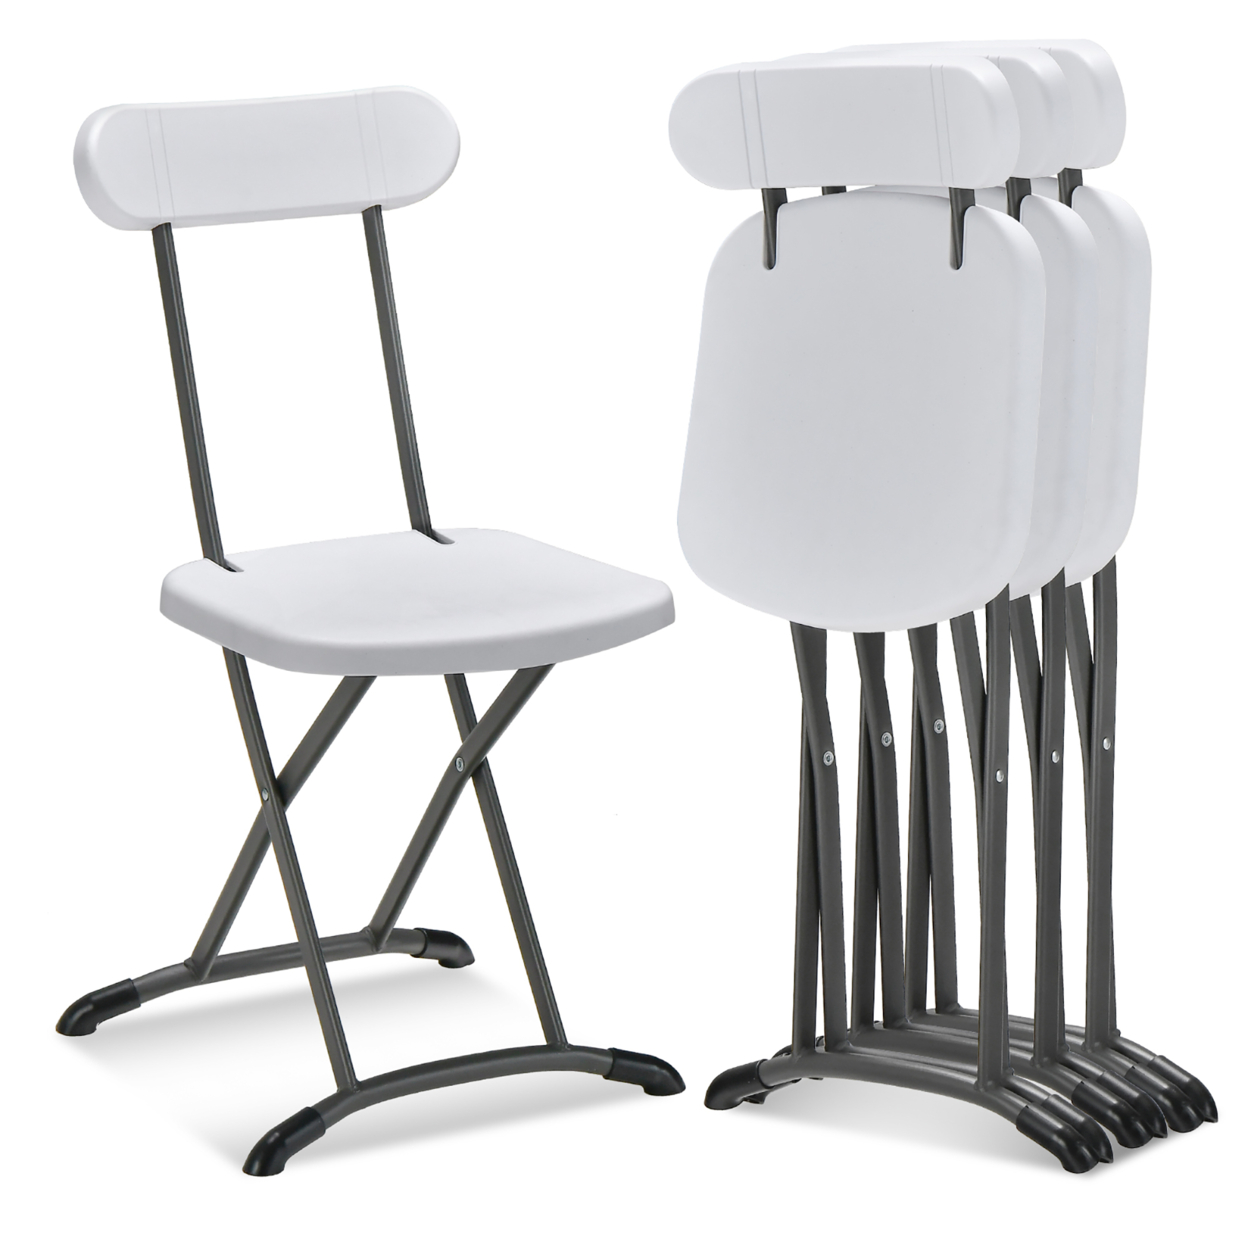 4-Pack Folding Chair W/ Metal Curved Feet Wide Seat & Ergonomic Backrest - White